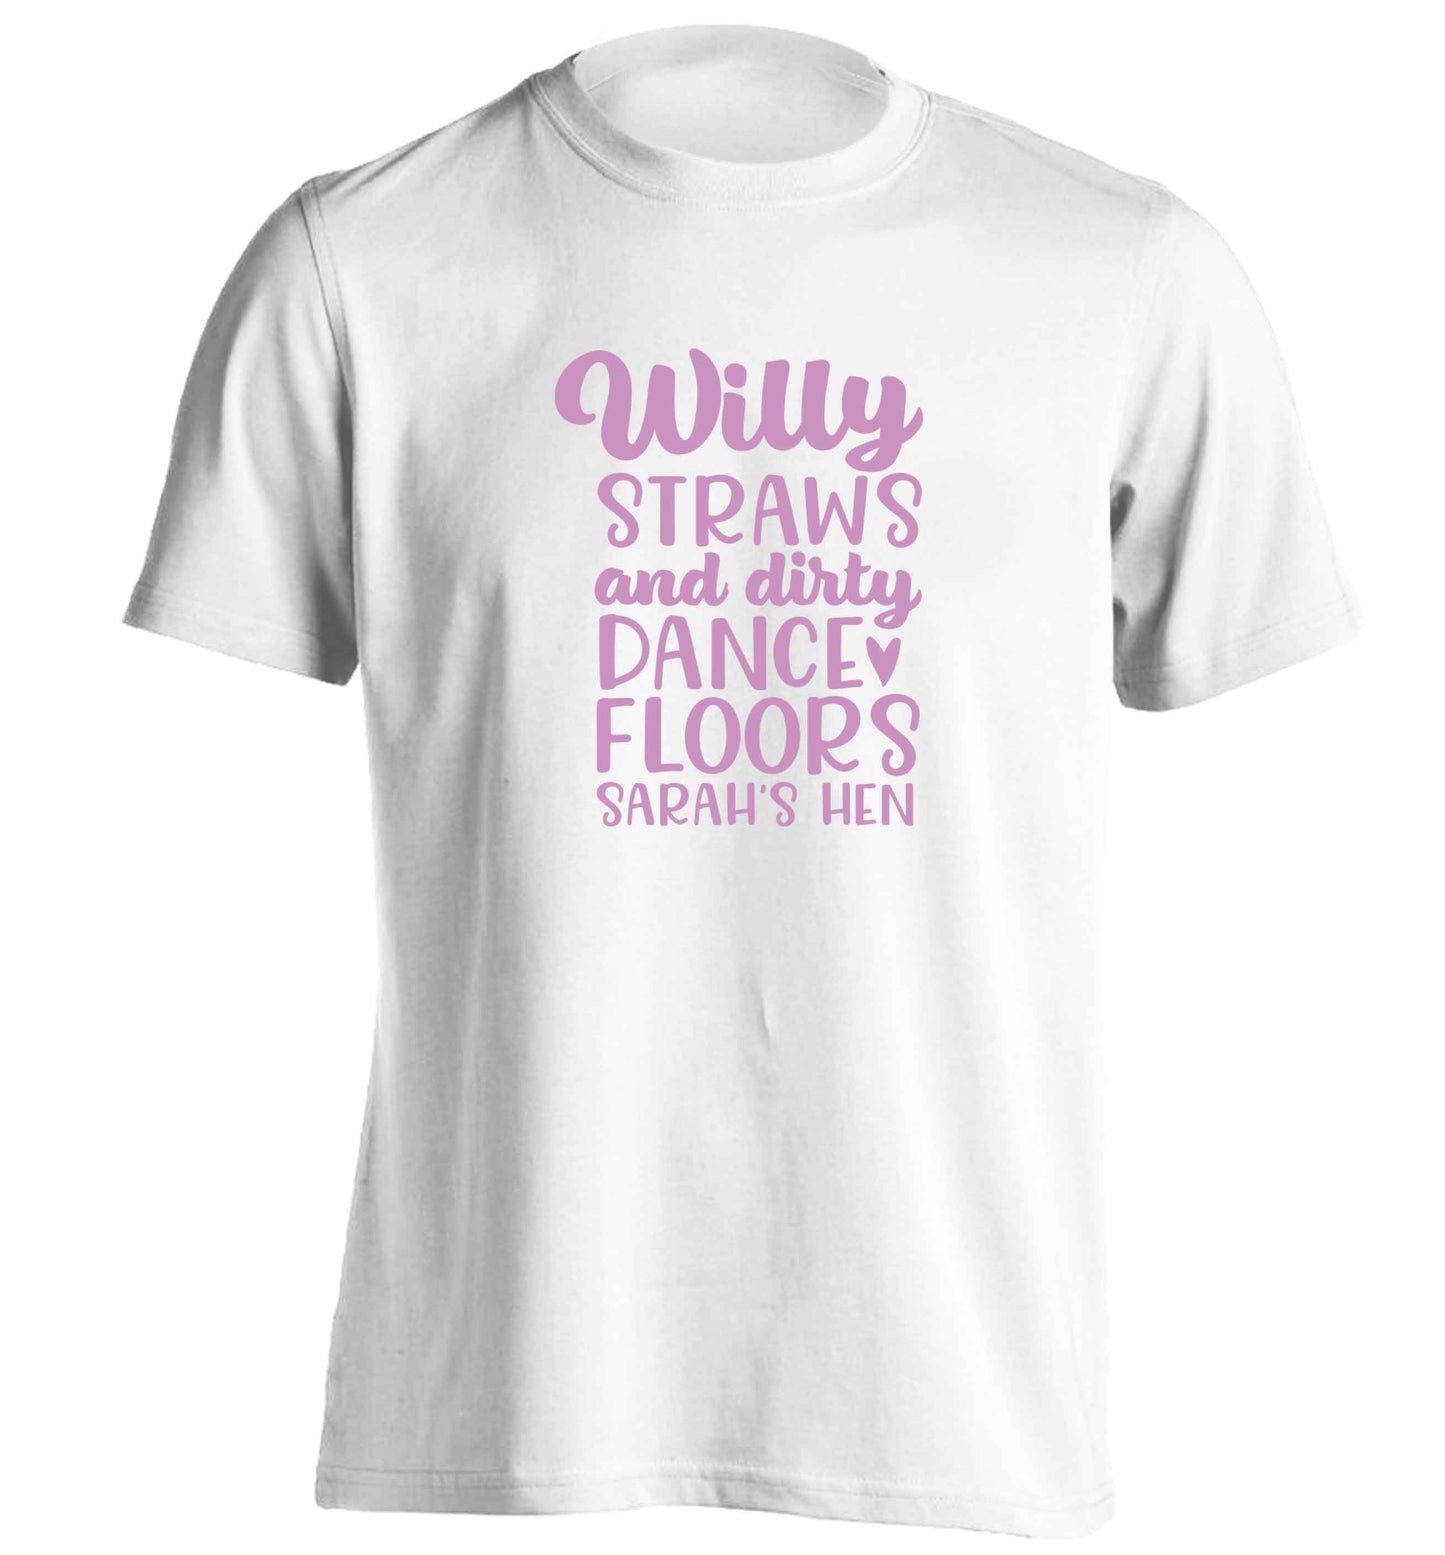 Willy straws and dirty dance floors adults unisex white Tshirt 2XL